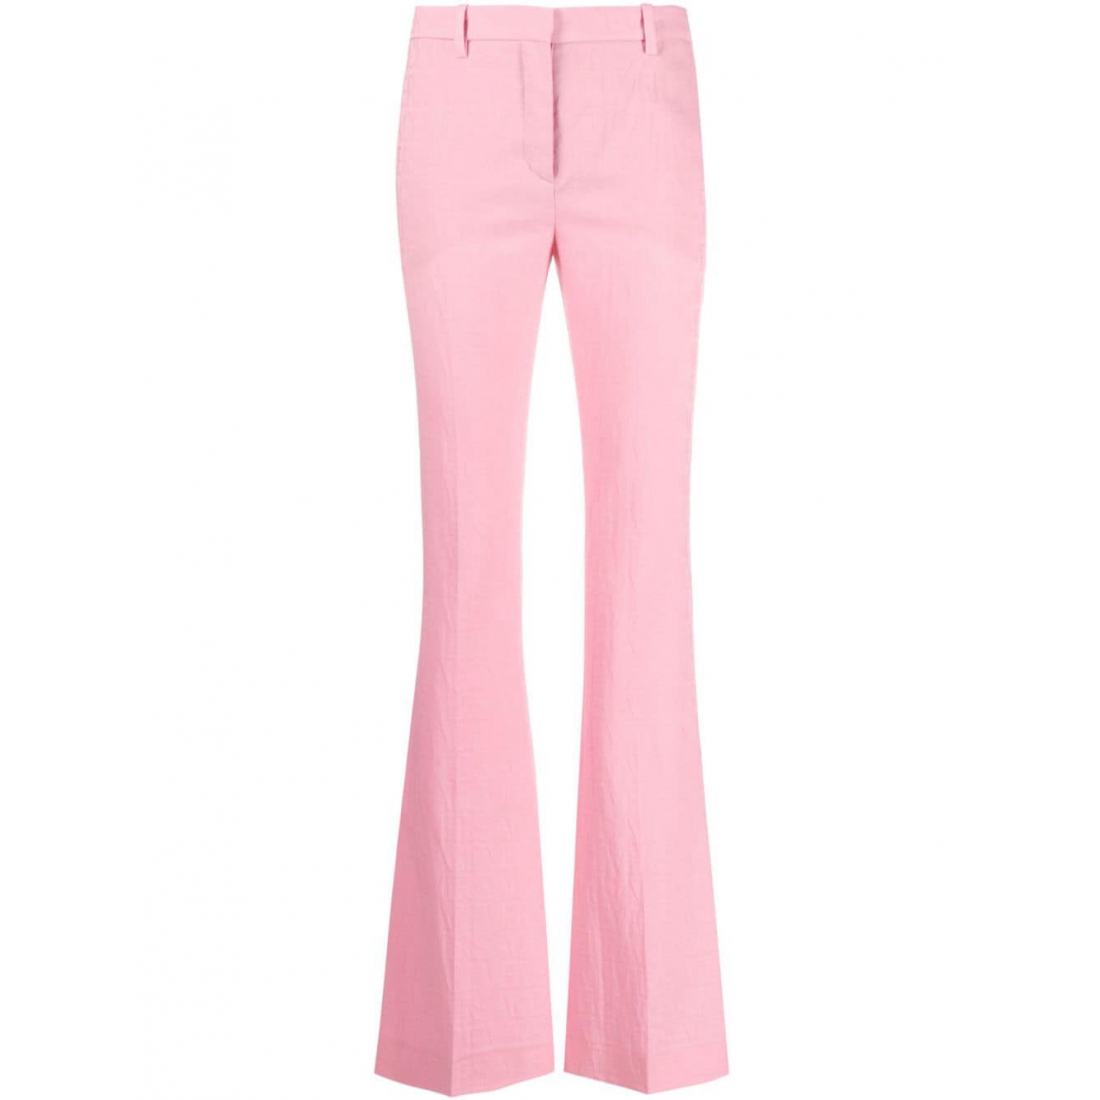 Women's 'Allover' Trousers